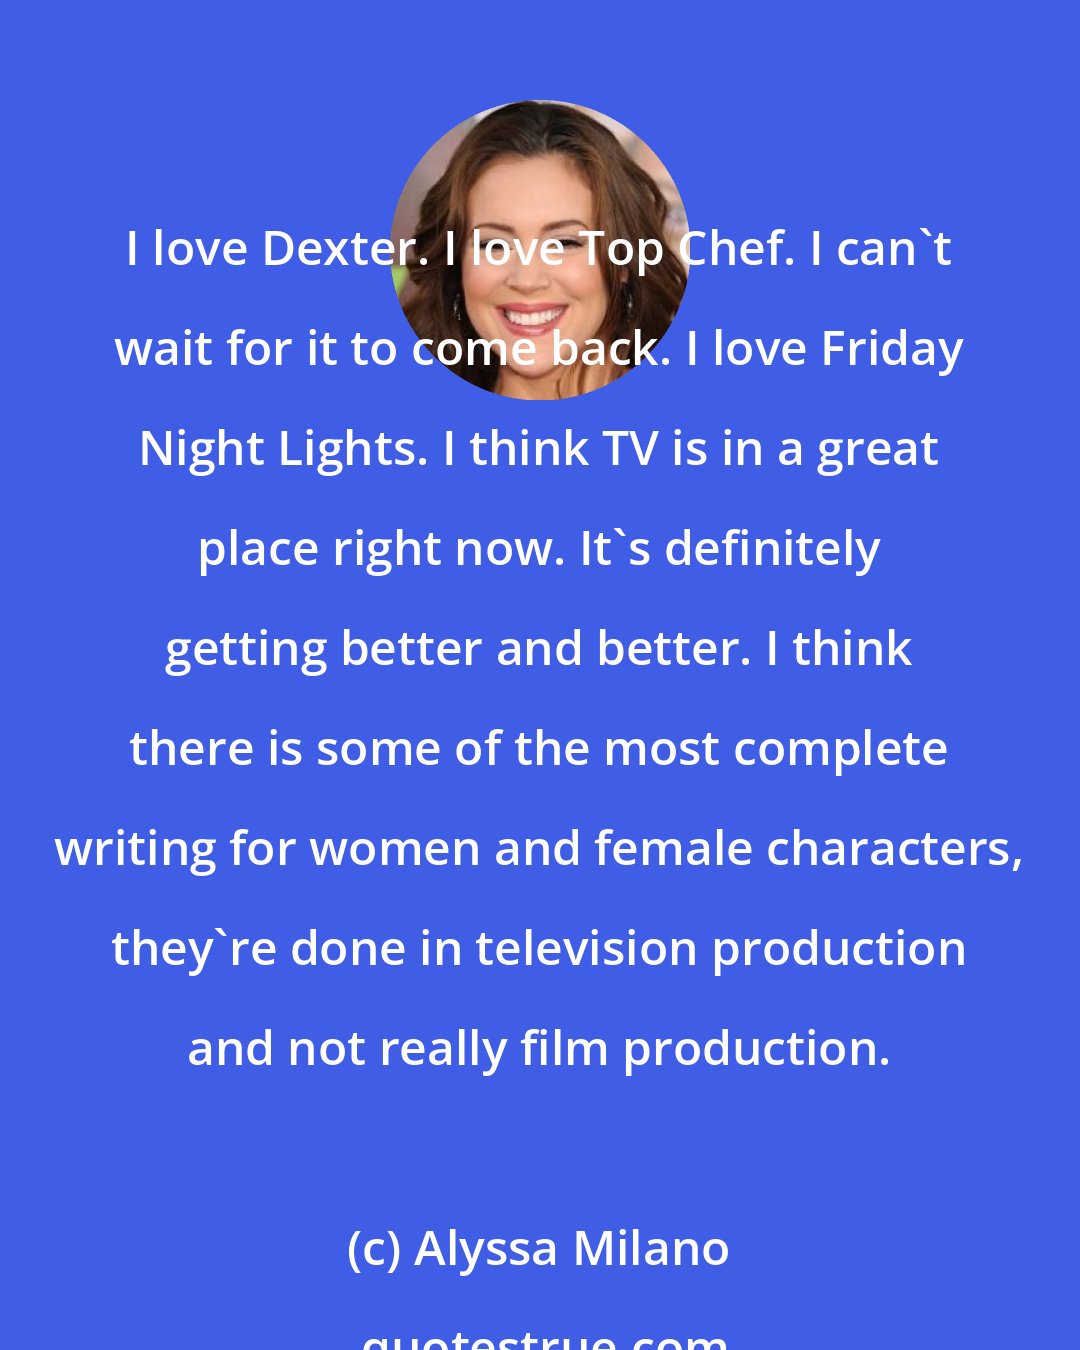 Alyssa Milano: I love Dexter. I love Top Chef. I can't wait for it to come back. I love Friday Night Lights. I think TV is in a great place right now. It's definitely getting better and better. I think there is some of the most complete writing for women and female characters, they're done in television production and not really film production.